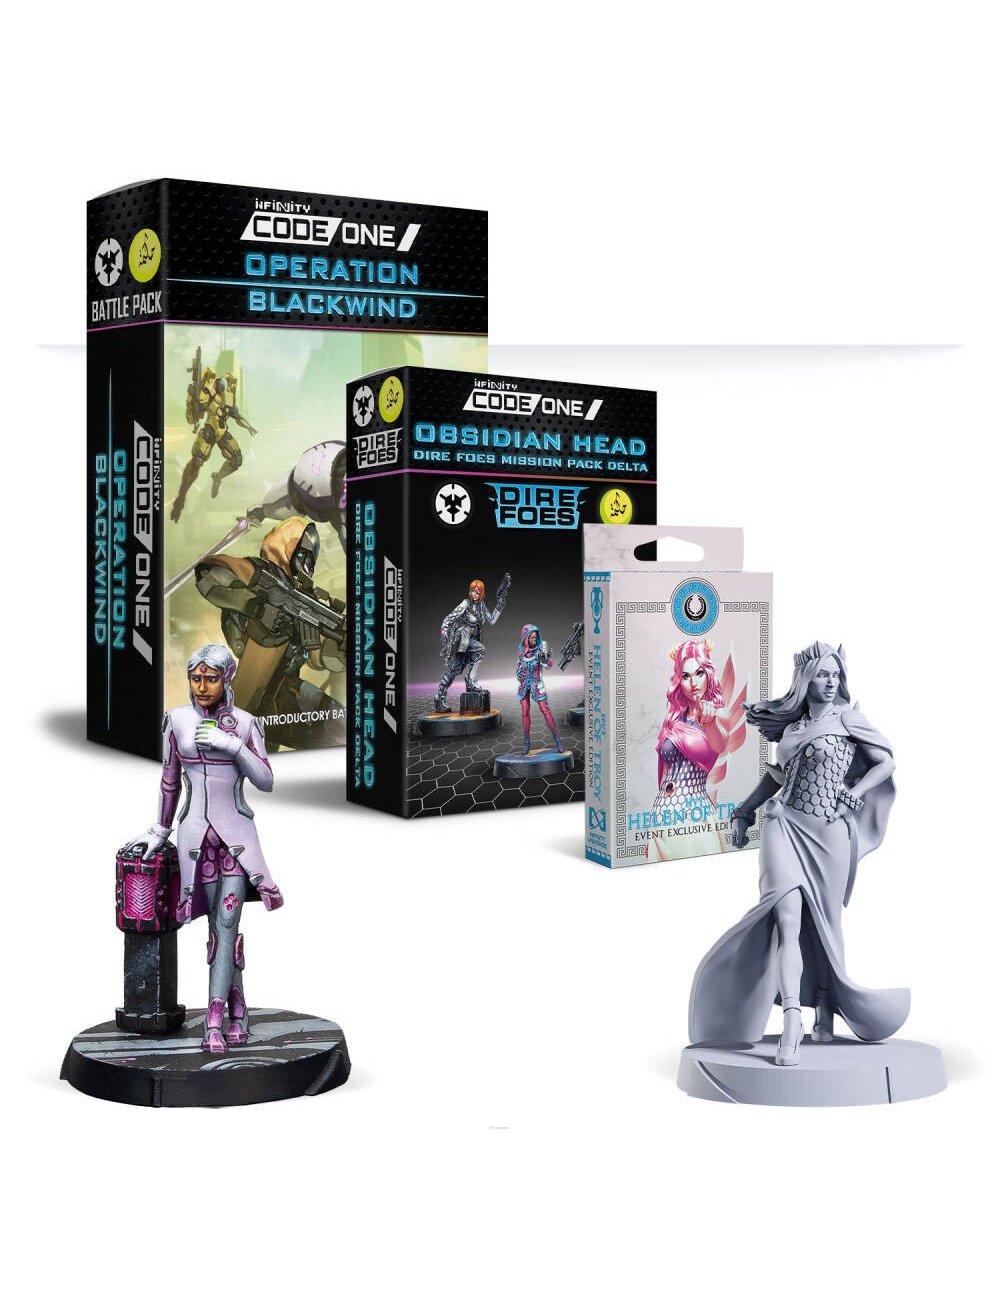 INFINITY BUNDLE: Operation Blackwind + Dire Foes Mission Delta: Obsidian Head + Helen of Troy Exclusive Edition